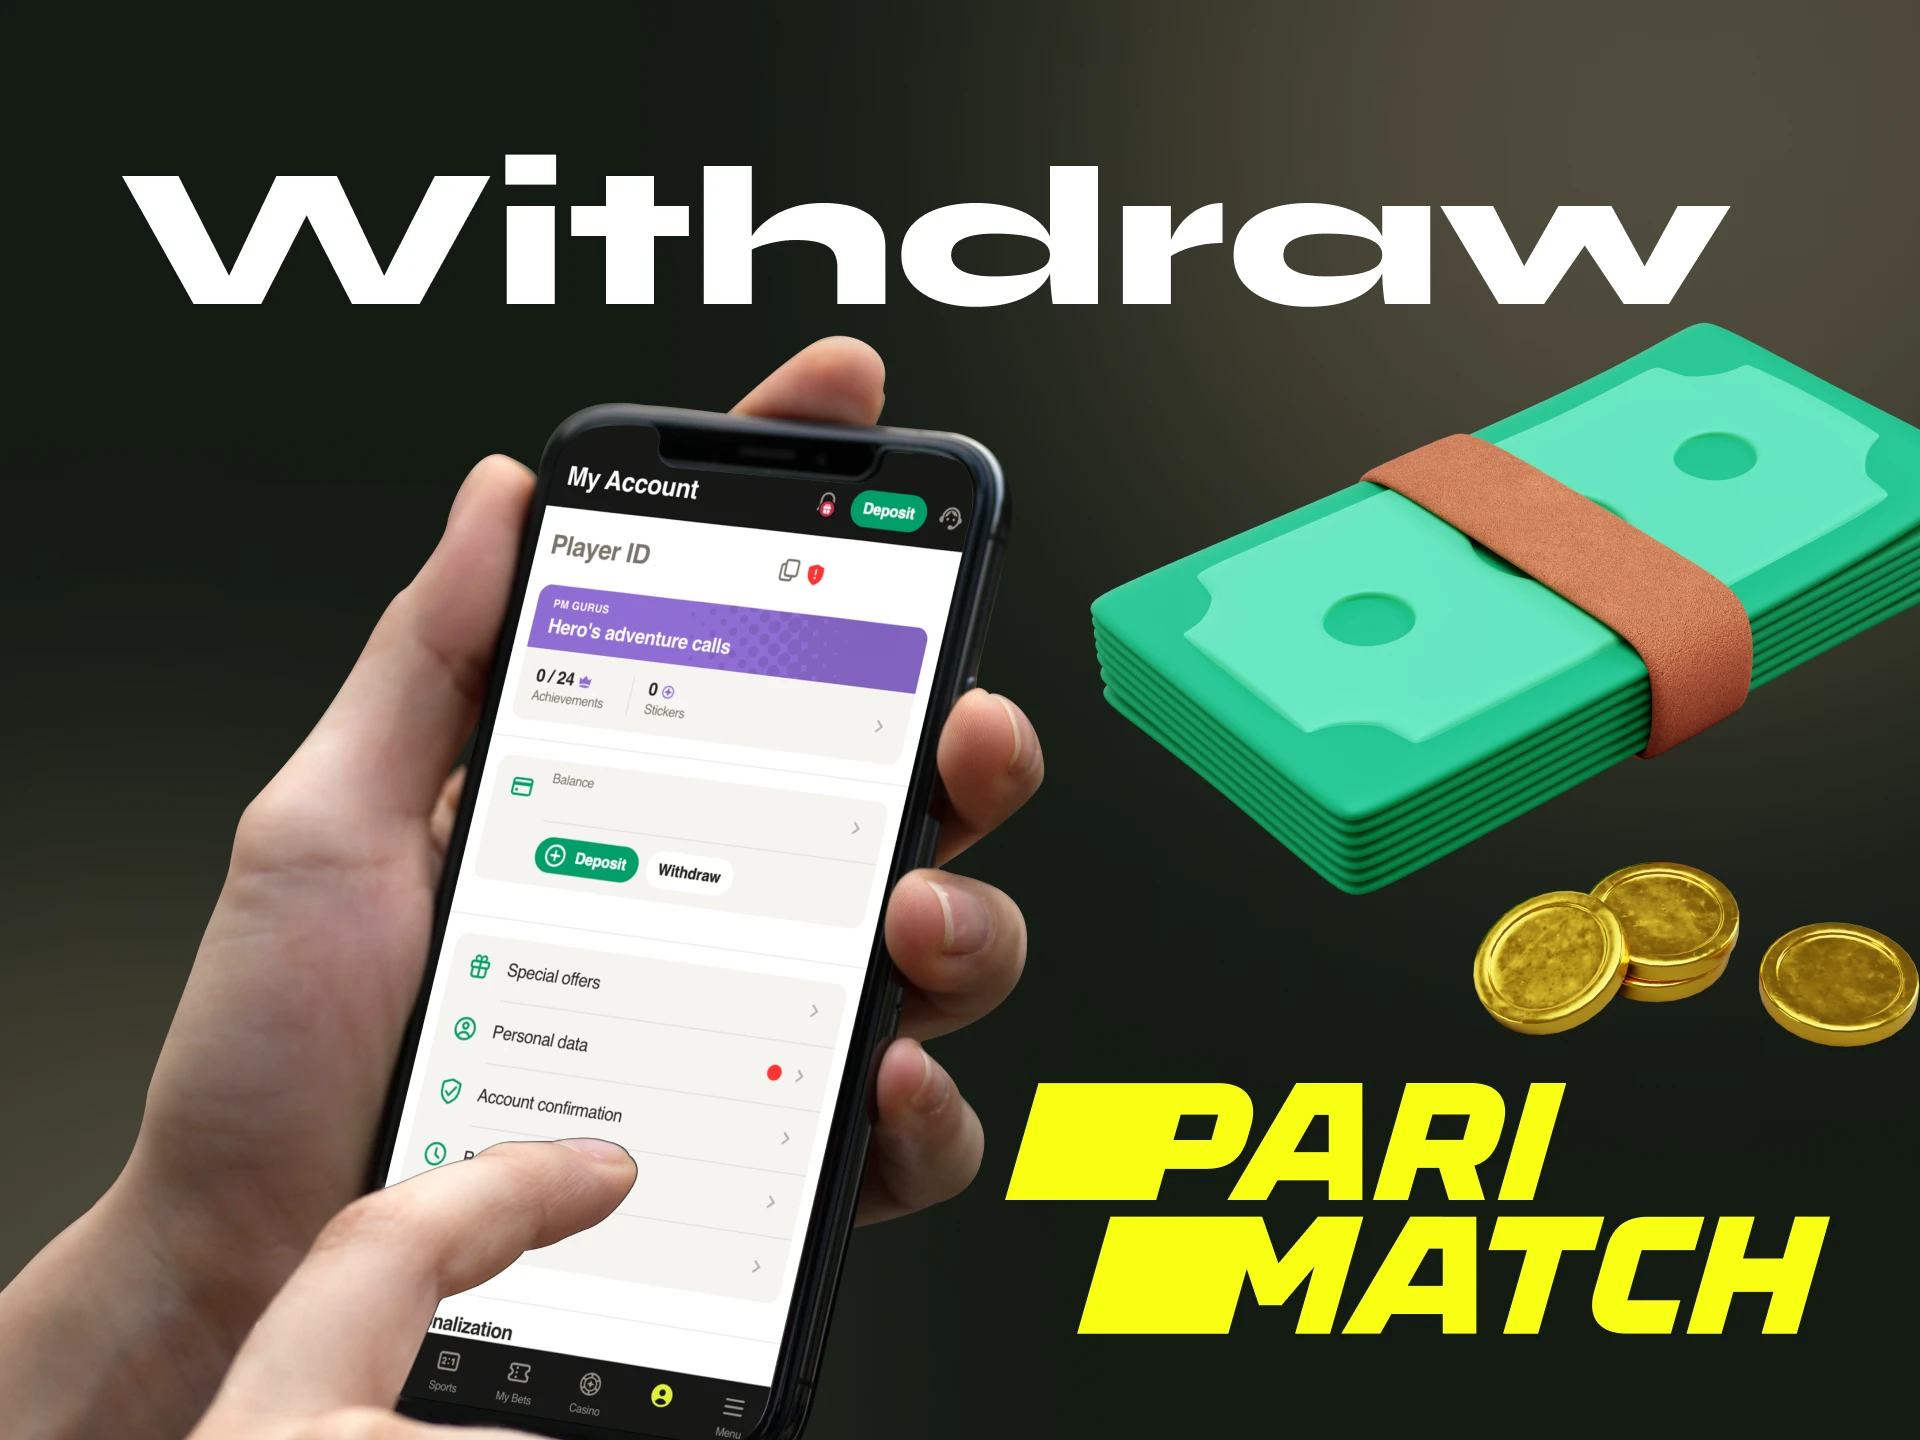 Instructions for players on how to withdraw money from their account at the Parimatch online casino.